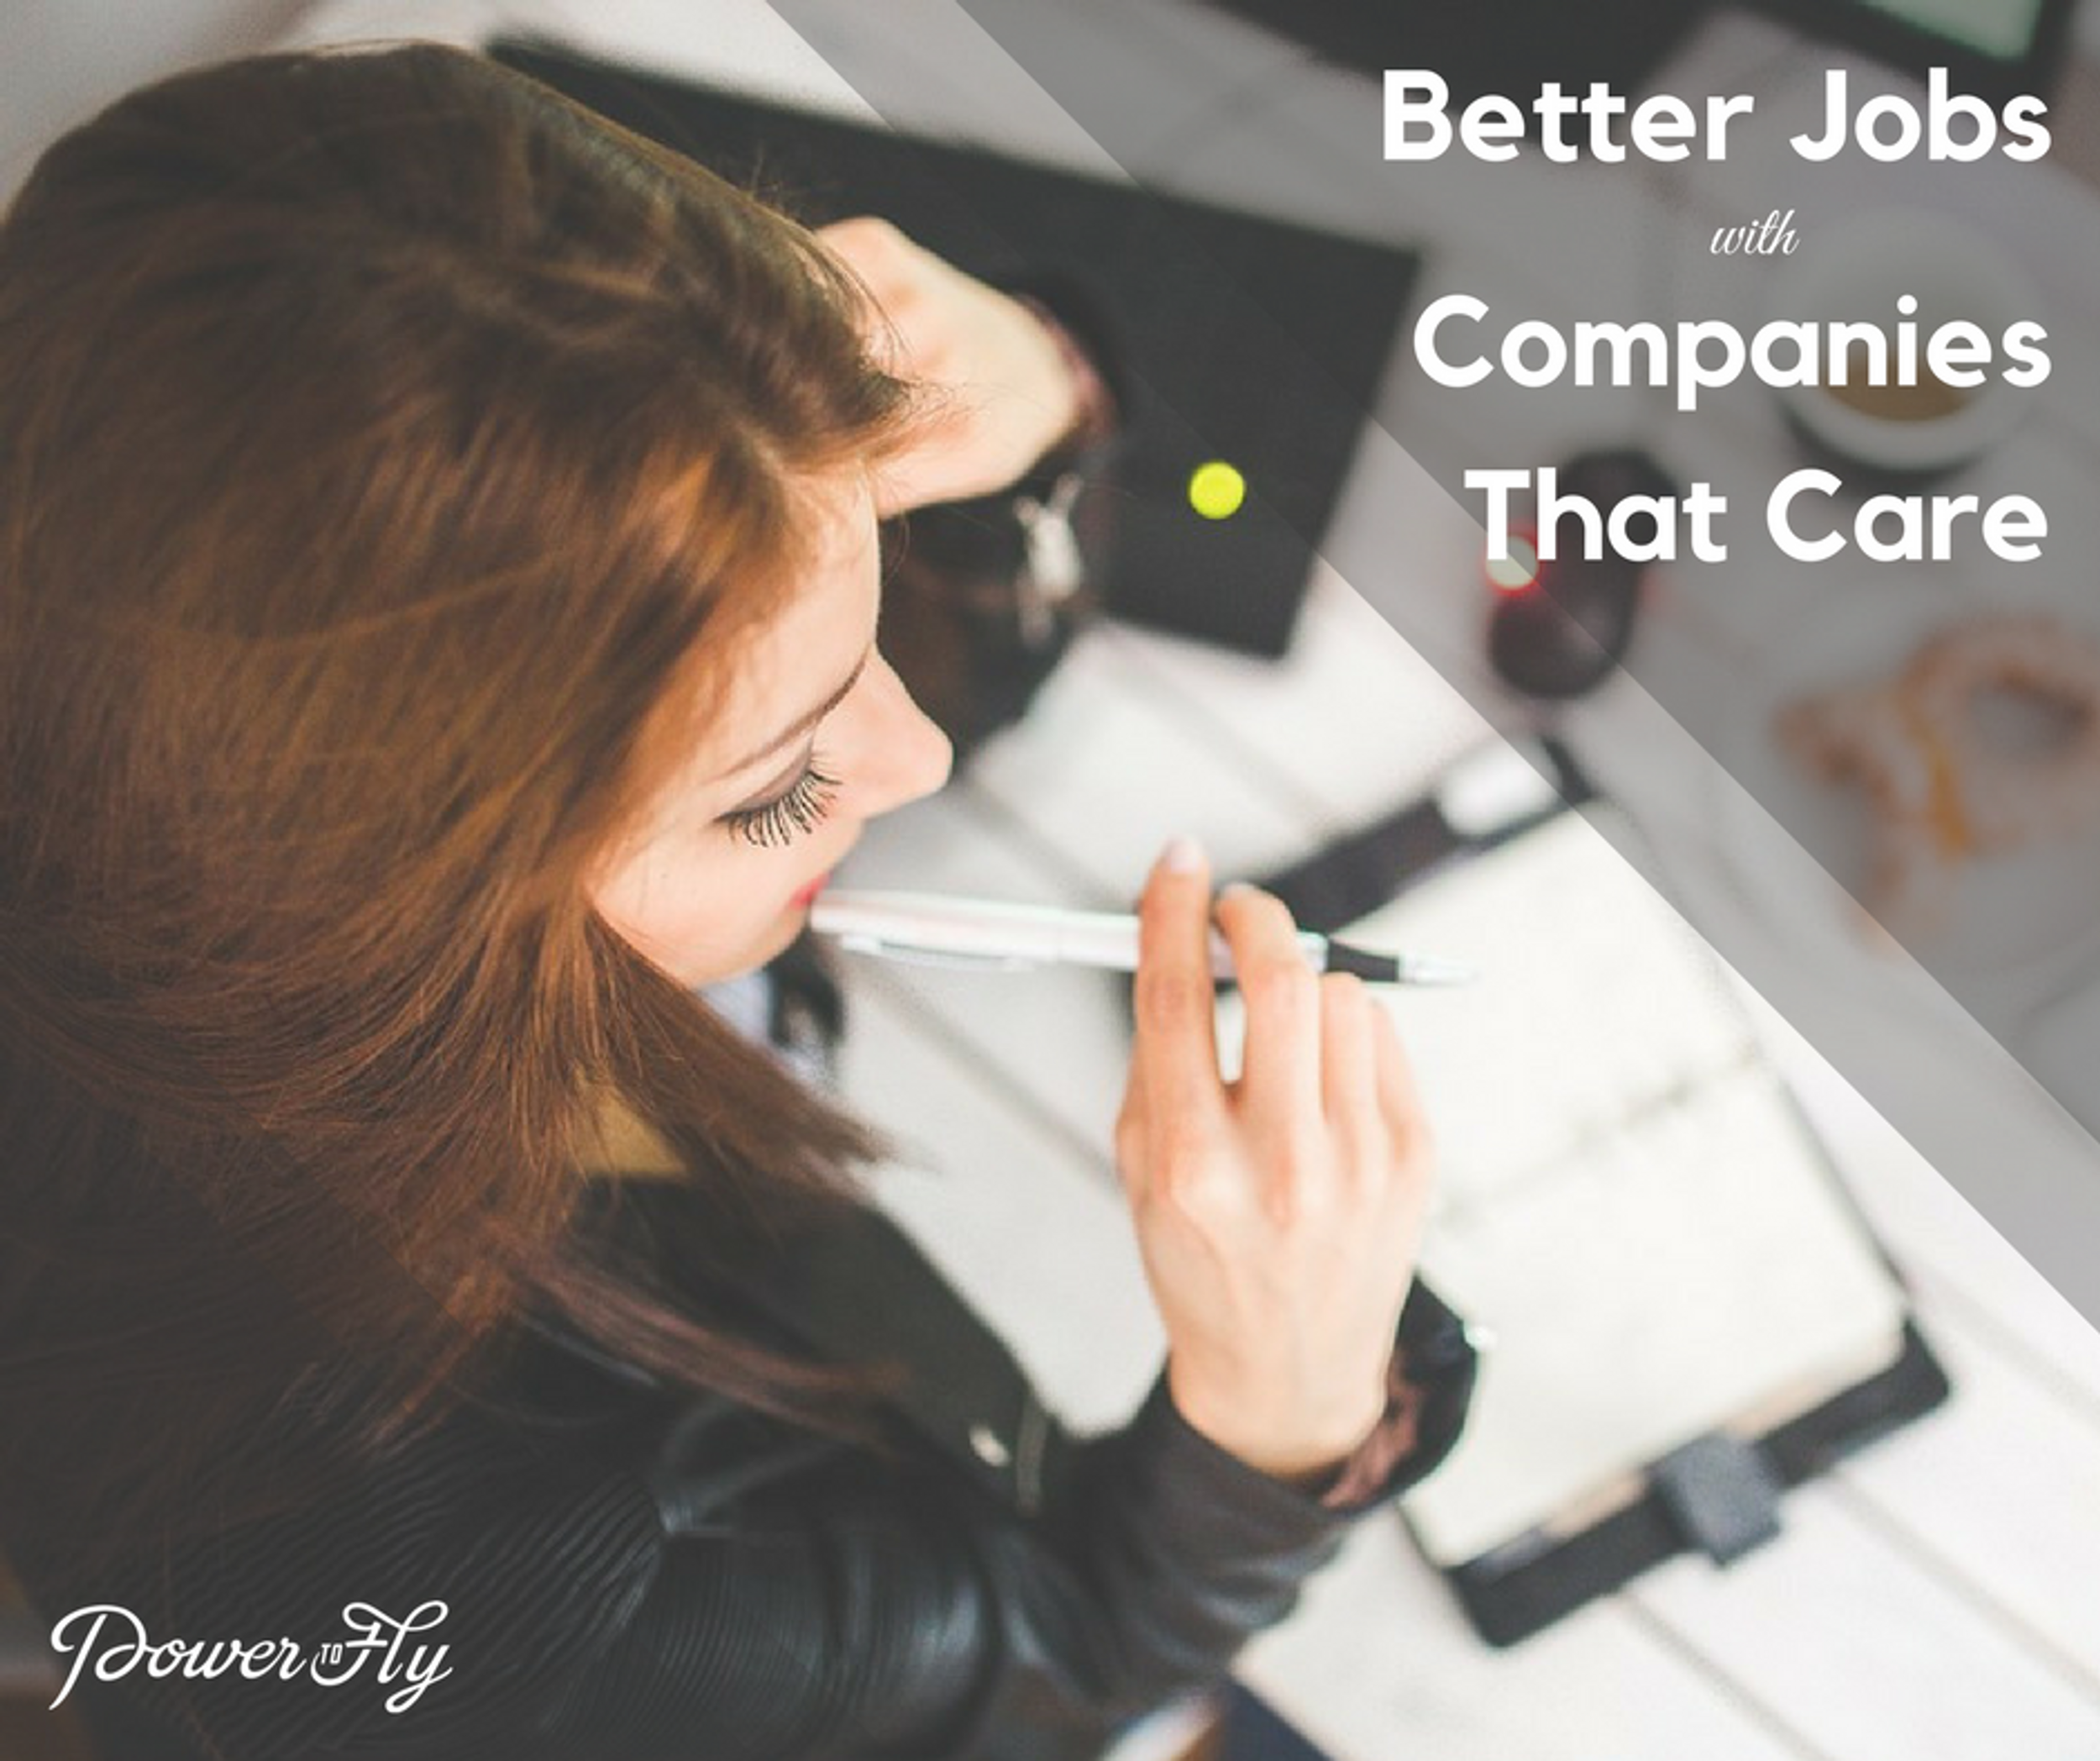 Better Jobs With Companies That Care - March 23, 2017